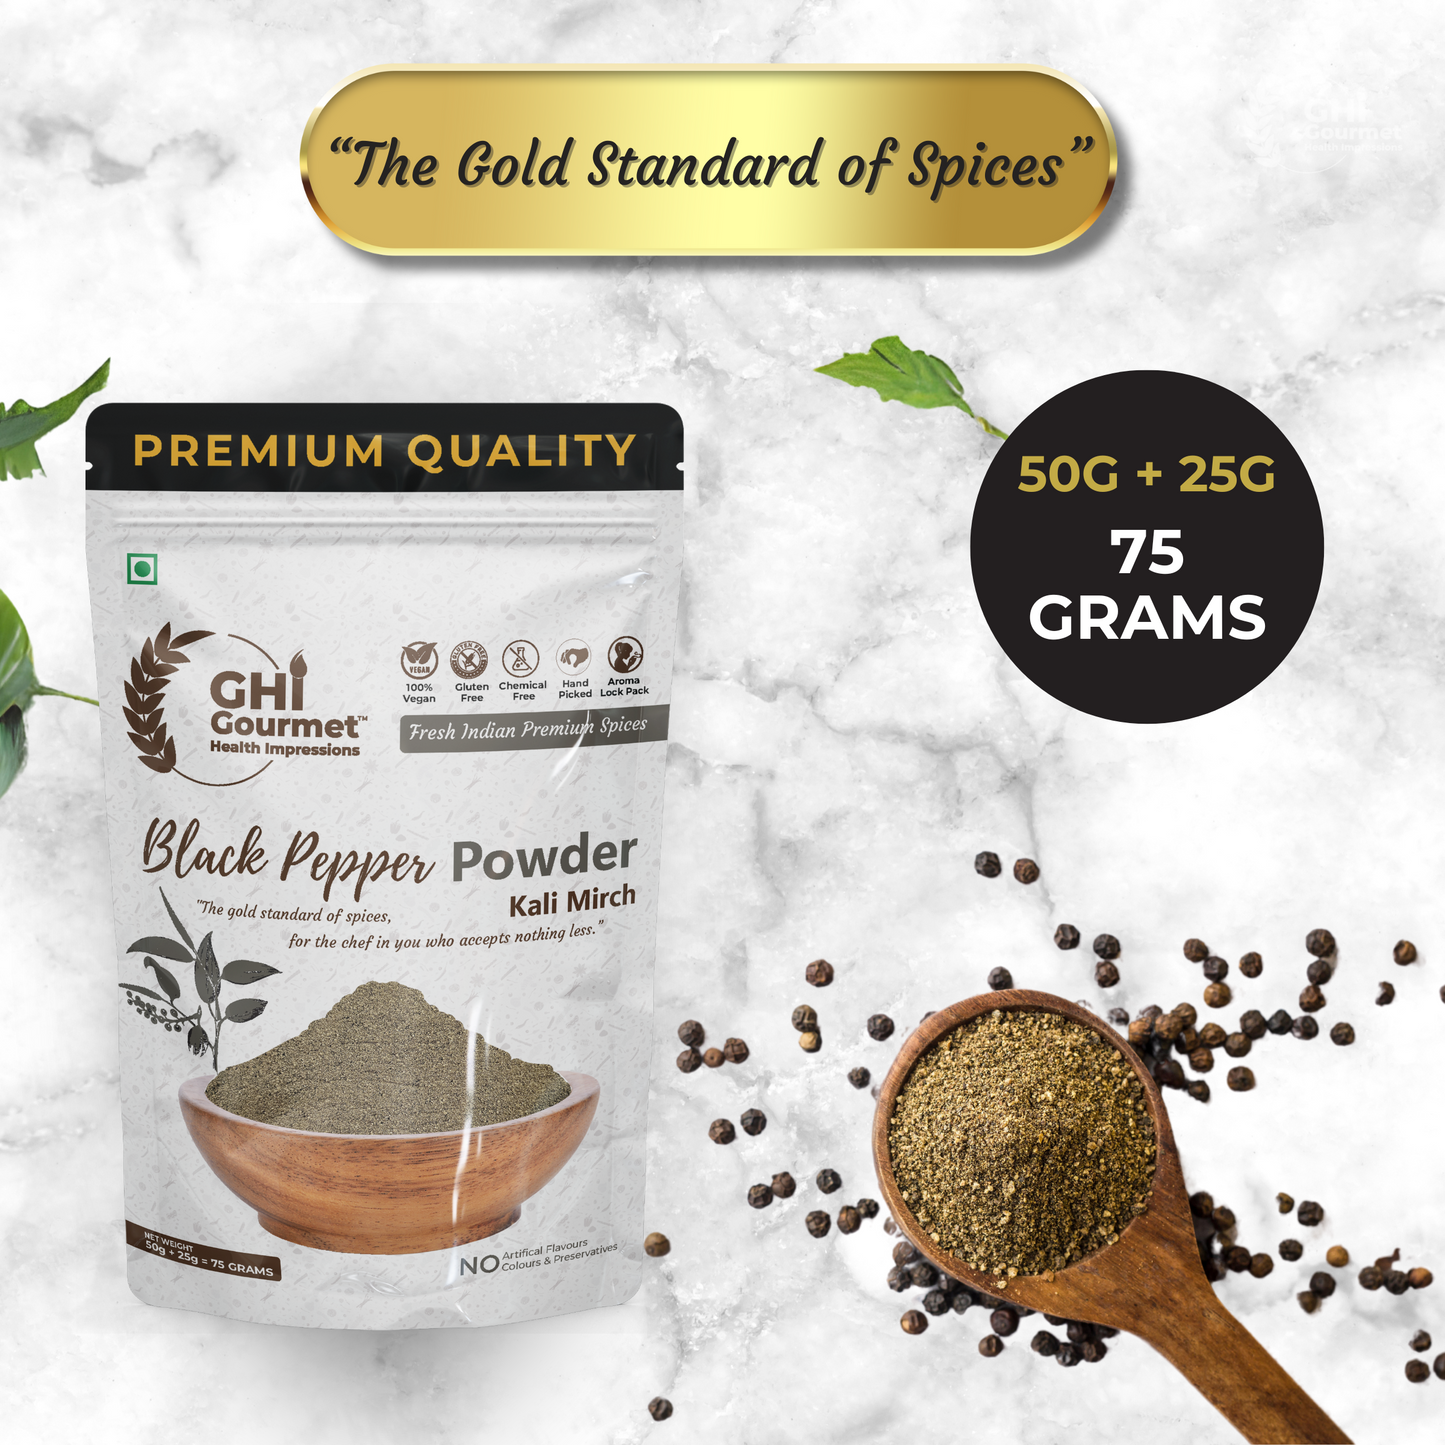 Spice Combo Pack, 6 Essential Indian Spices, Whole Black Pepper 100g, Whole Clove 50, Whole Green Cardamom 8mm+ 50g, Black Pepper Powder 75g, Cinnamon Powder 75g, Cardamom Powder 75g